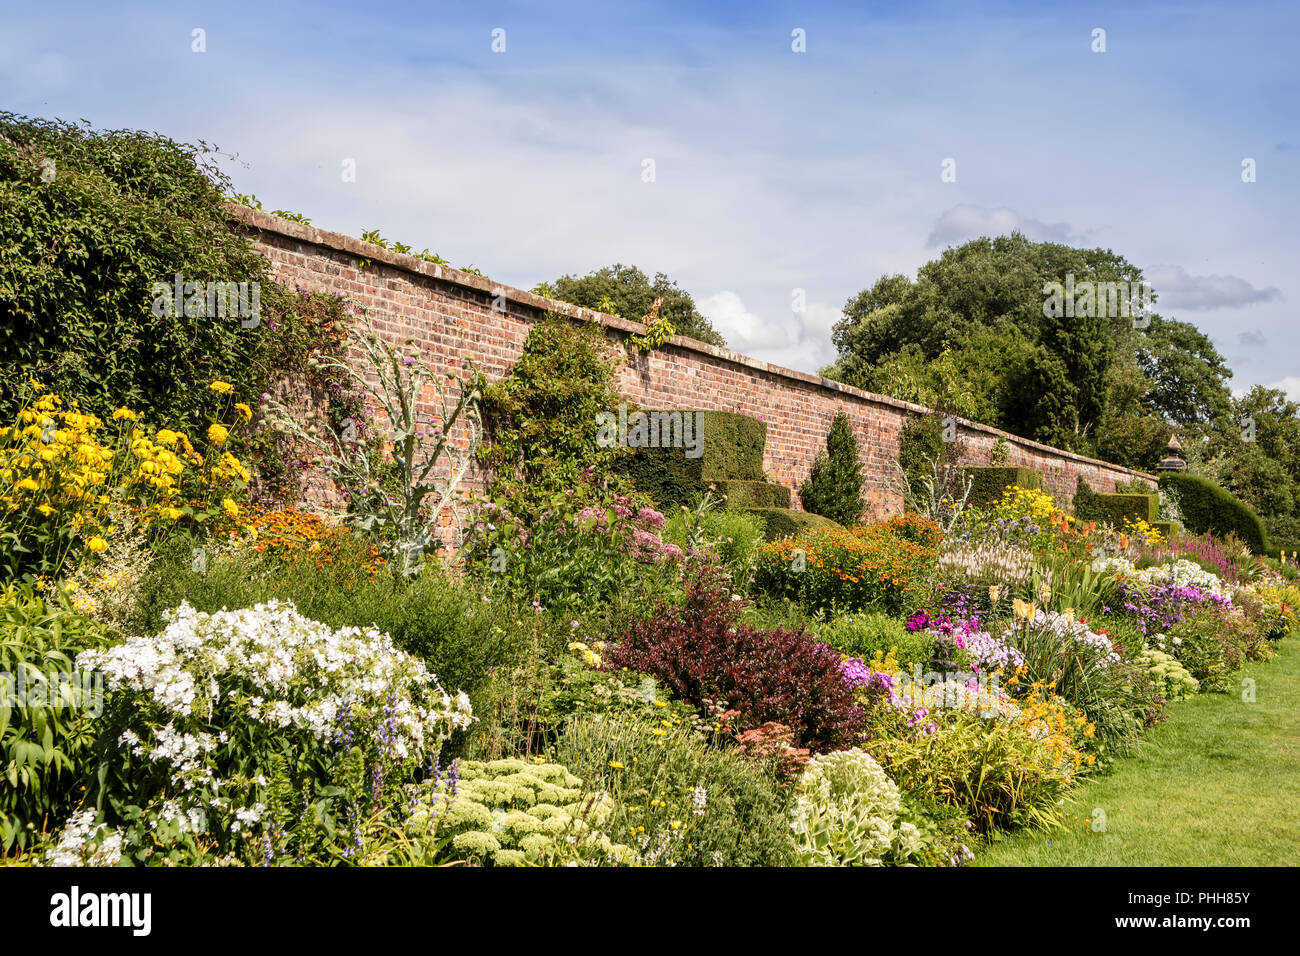 Long herbaceous border in summertime with perennial flowering plants and topiary shrubs in a walled garden. Stock Photo